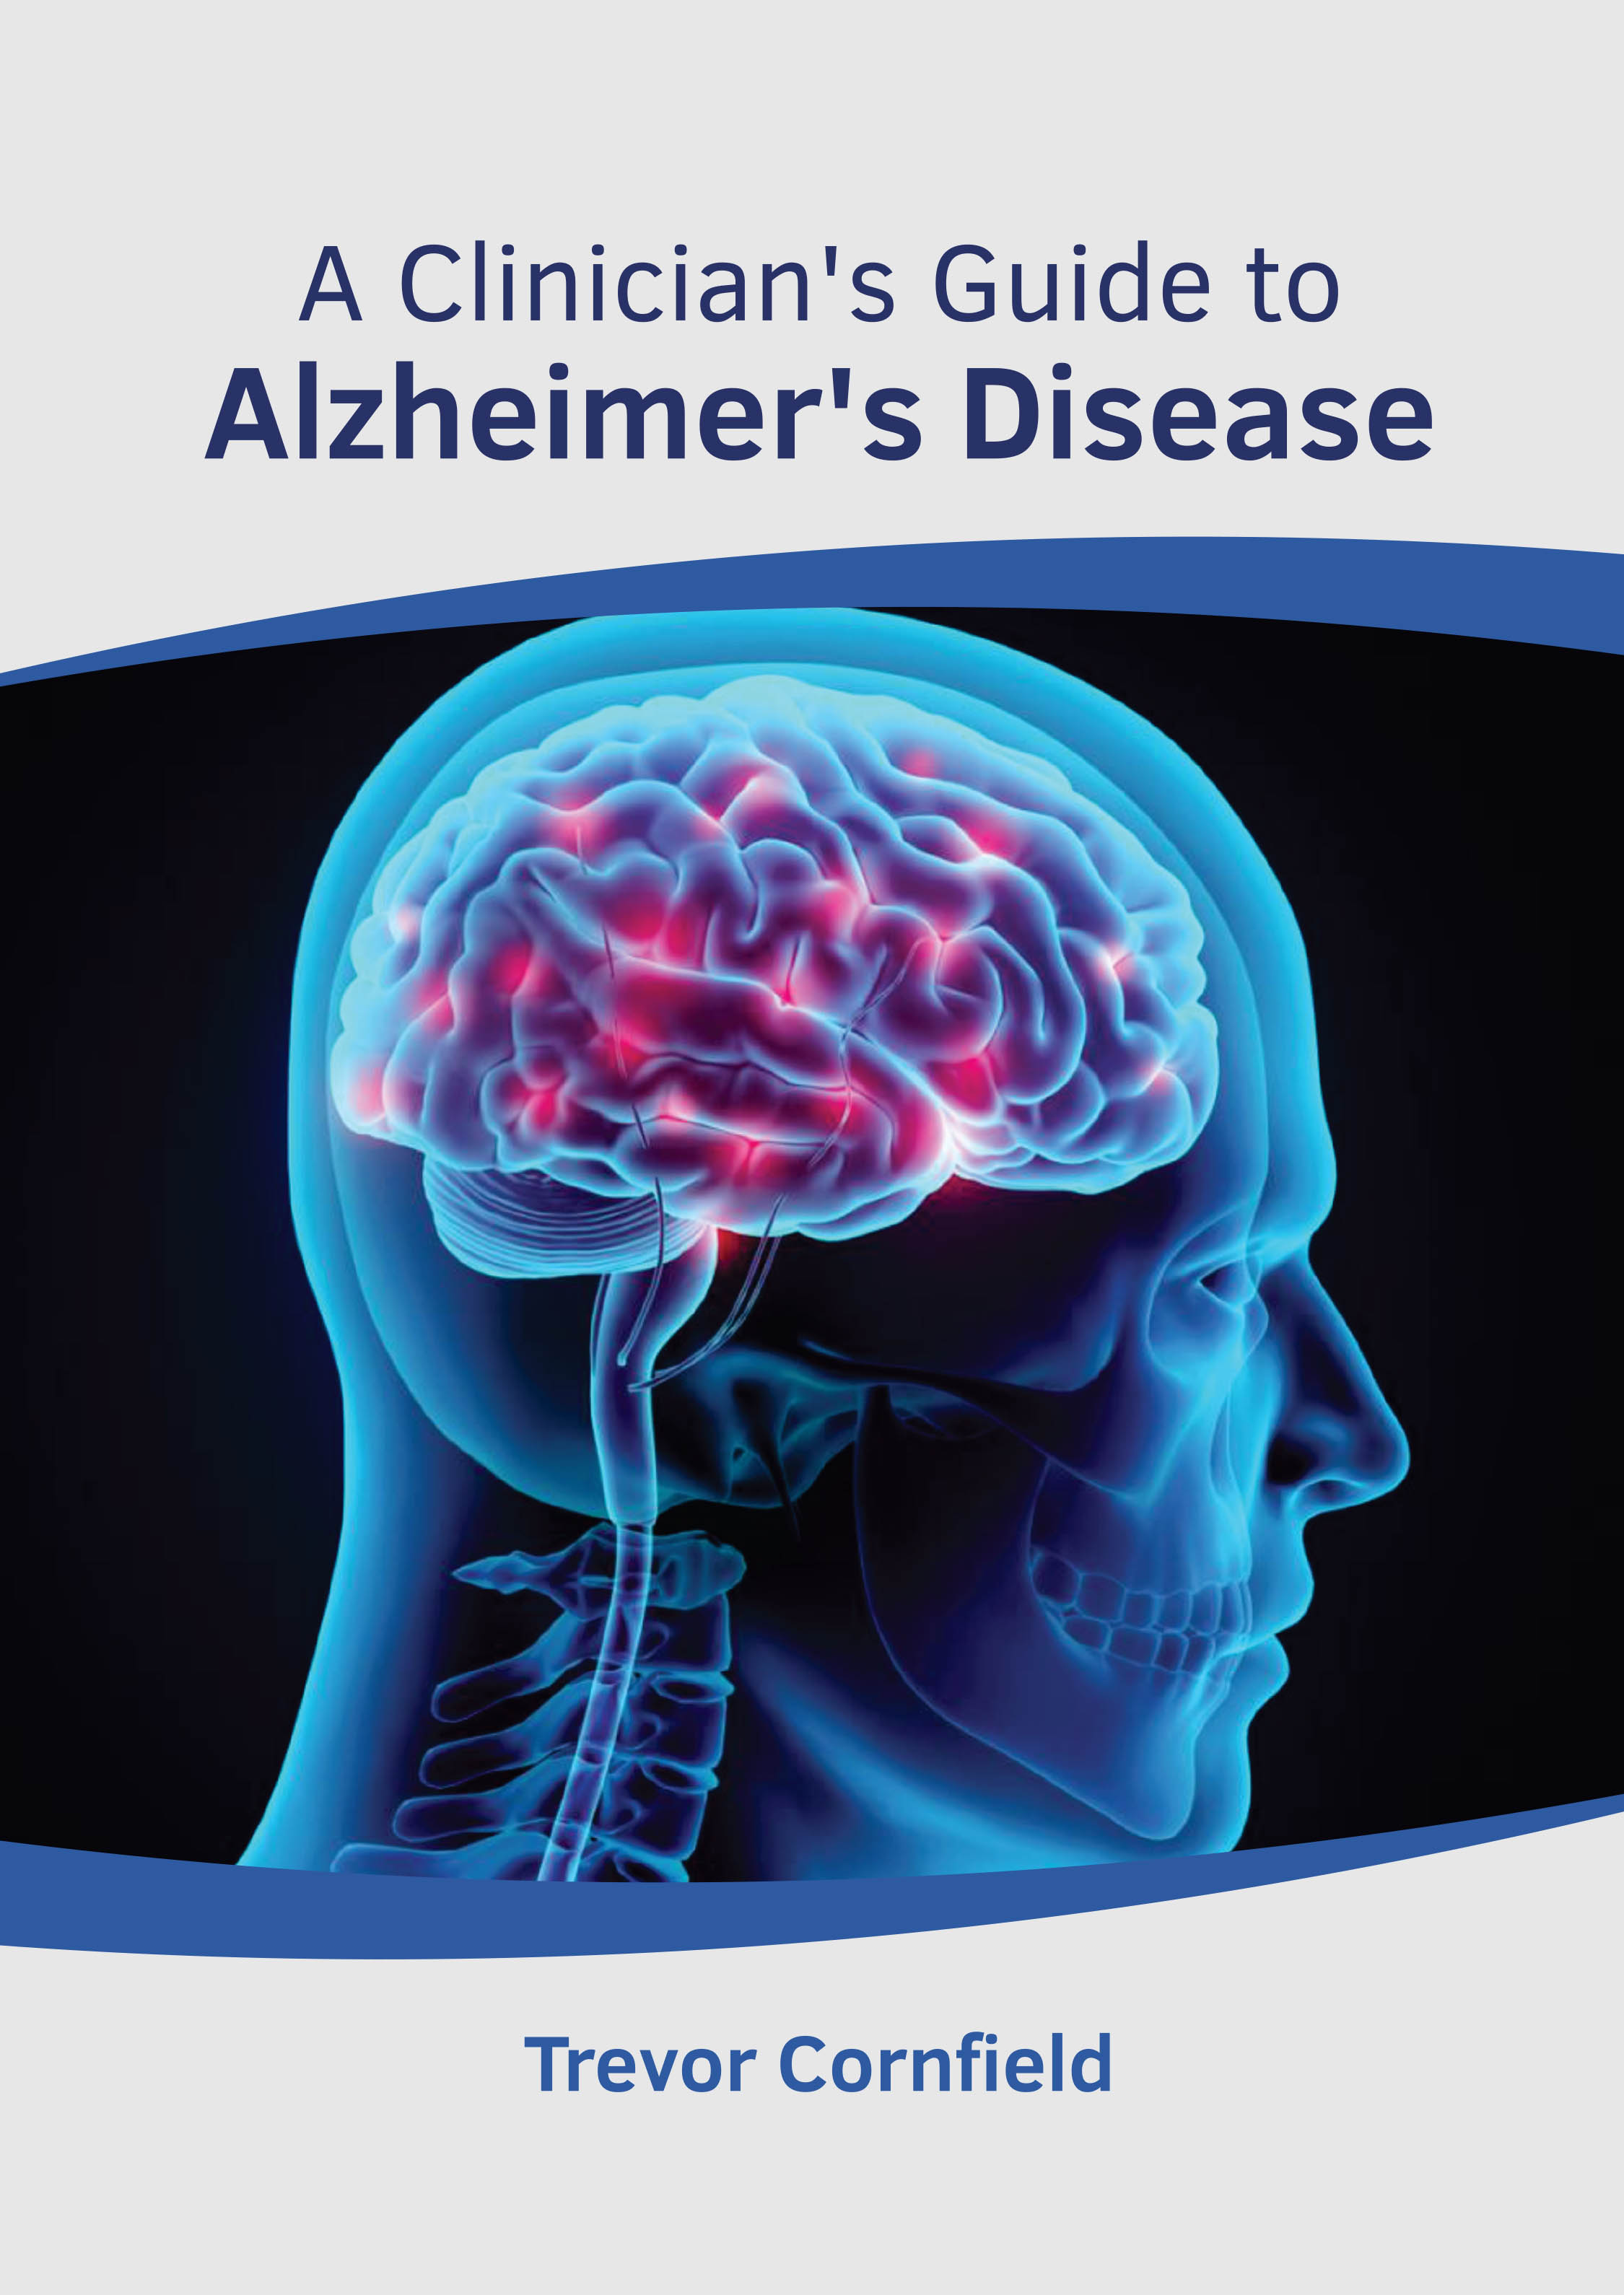 

exclusive-publishers/american-medical-publishers/a-clinician-s-guide-to-alzheimer-s-disease-9781639274321